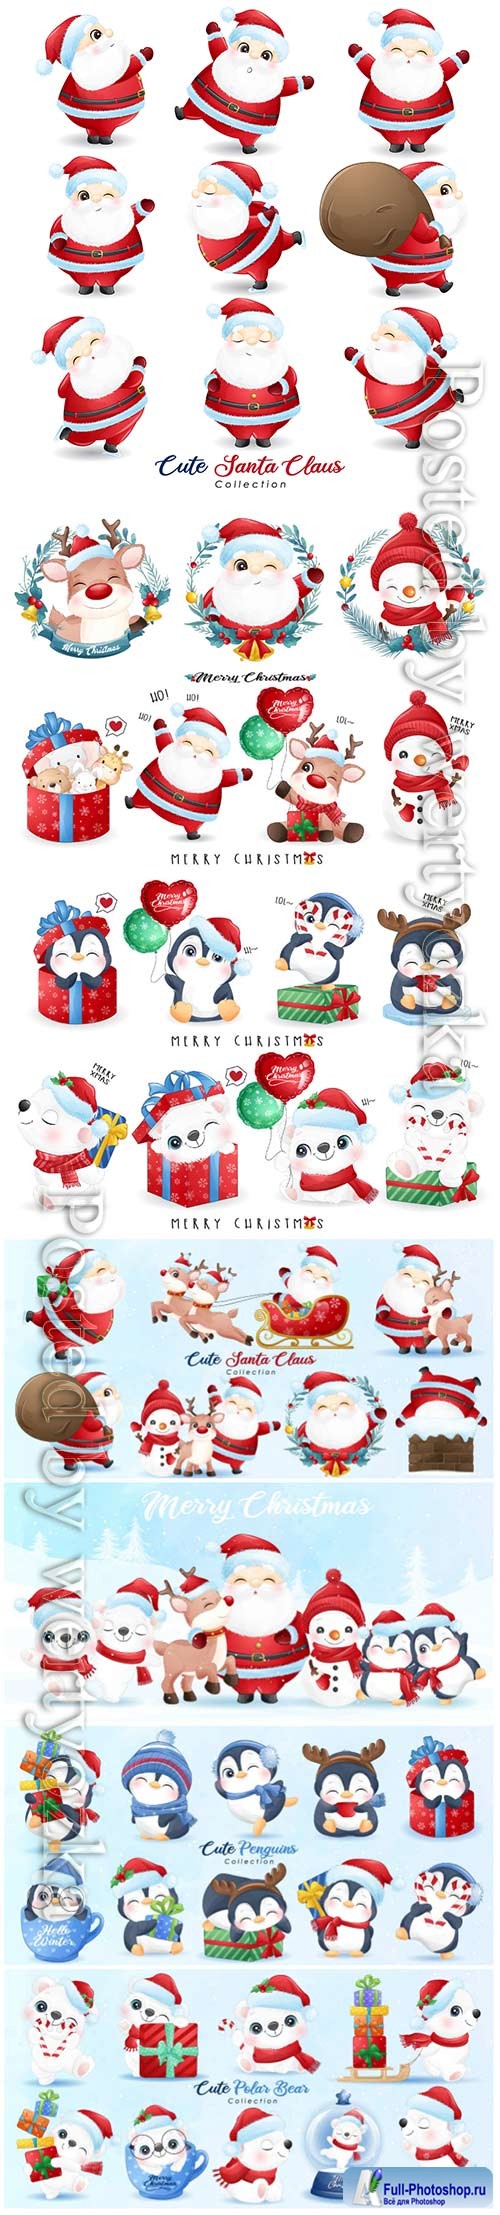 Cute santa claus and friends for christmas day with watercolor vector illustration